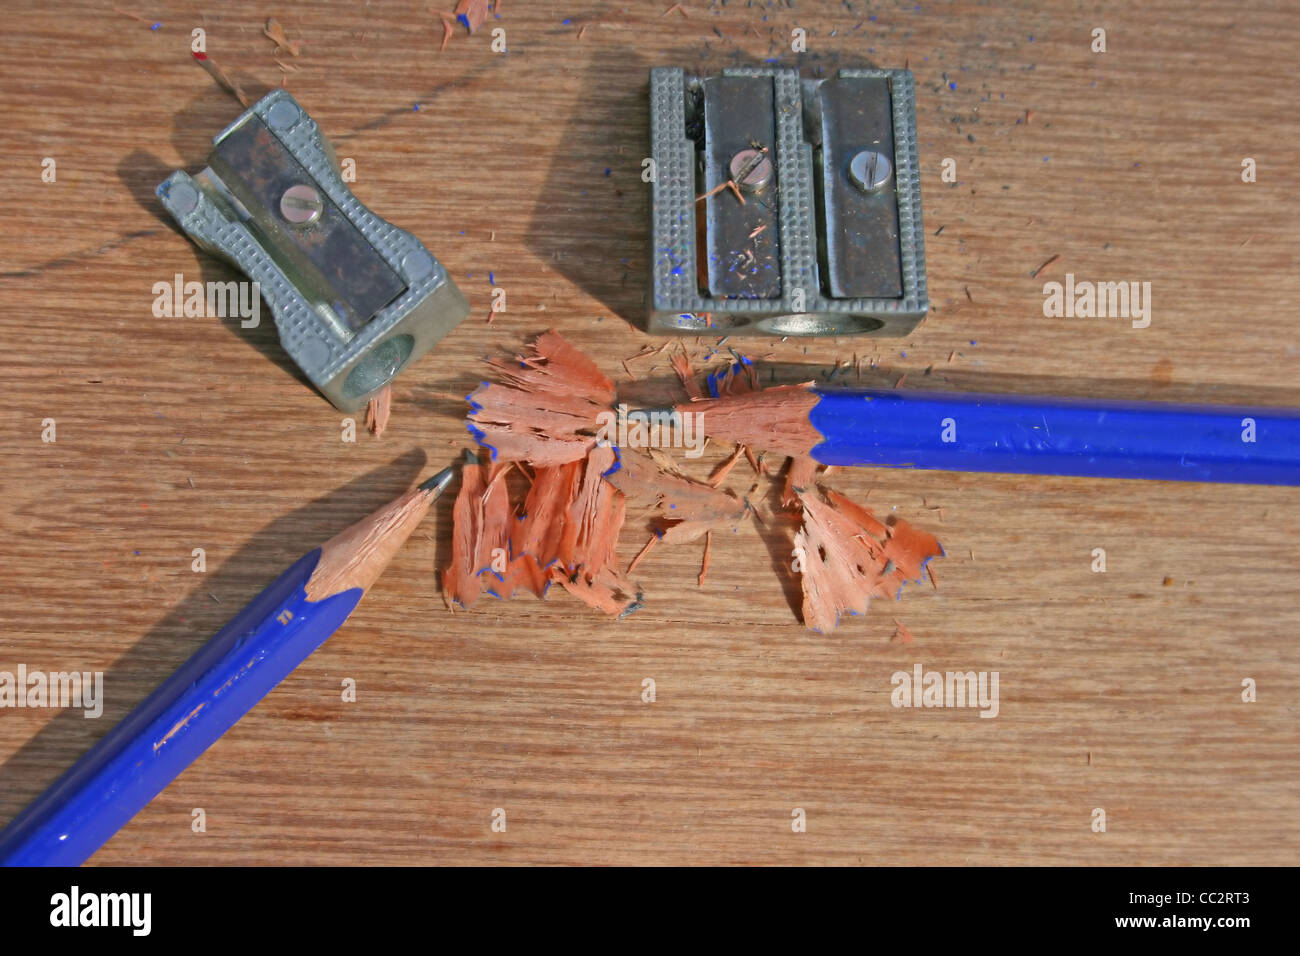 Pencils, pencil sharpeners and shavings on plywood worktop Stock Photo